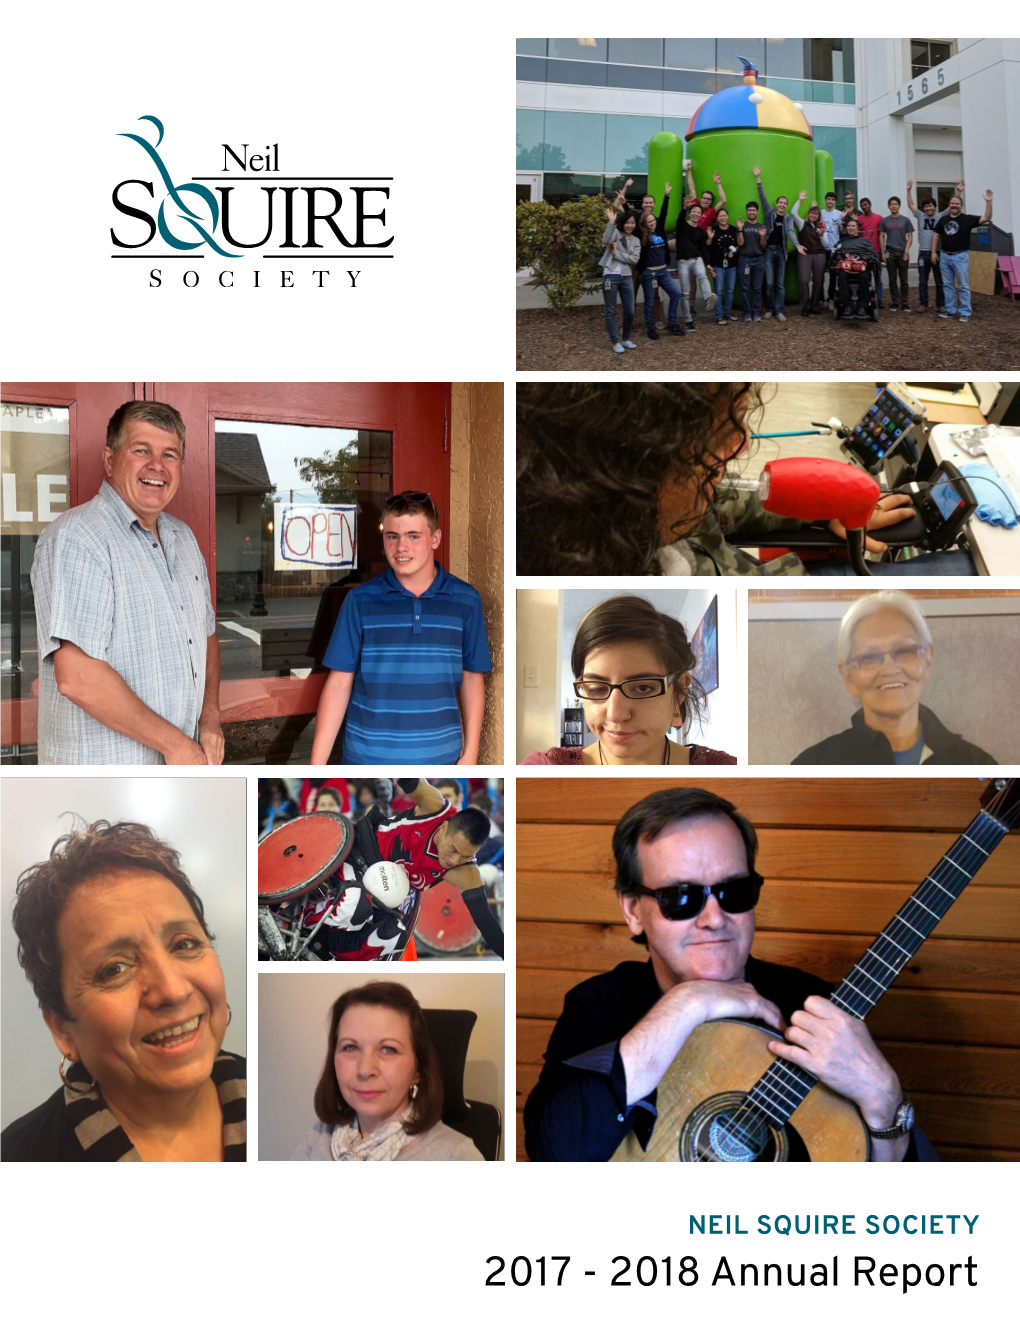 Neil Squire Society Annual Report 2017-2018